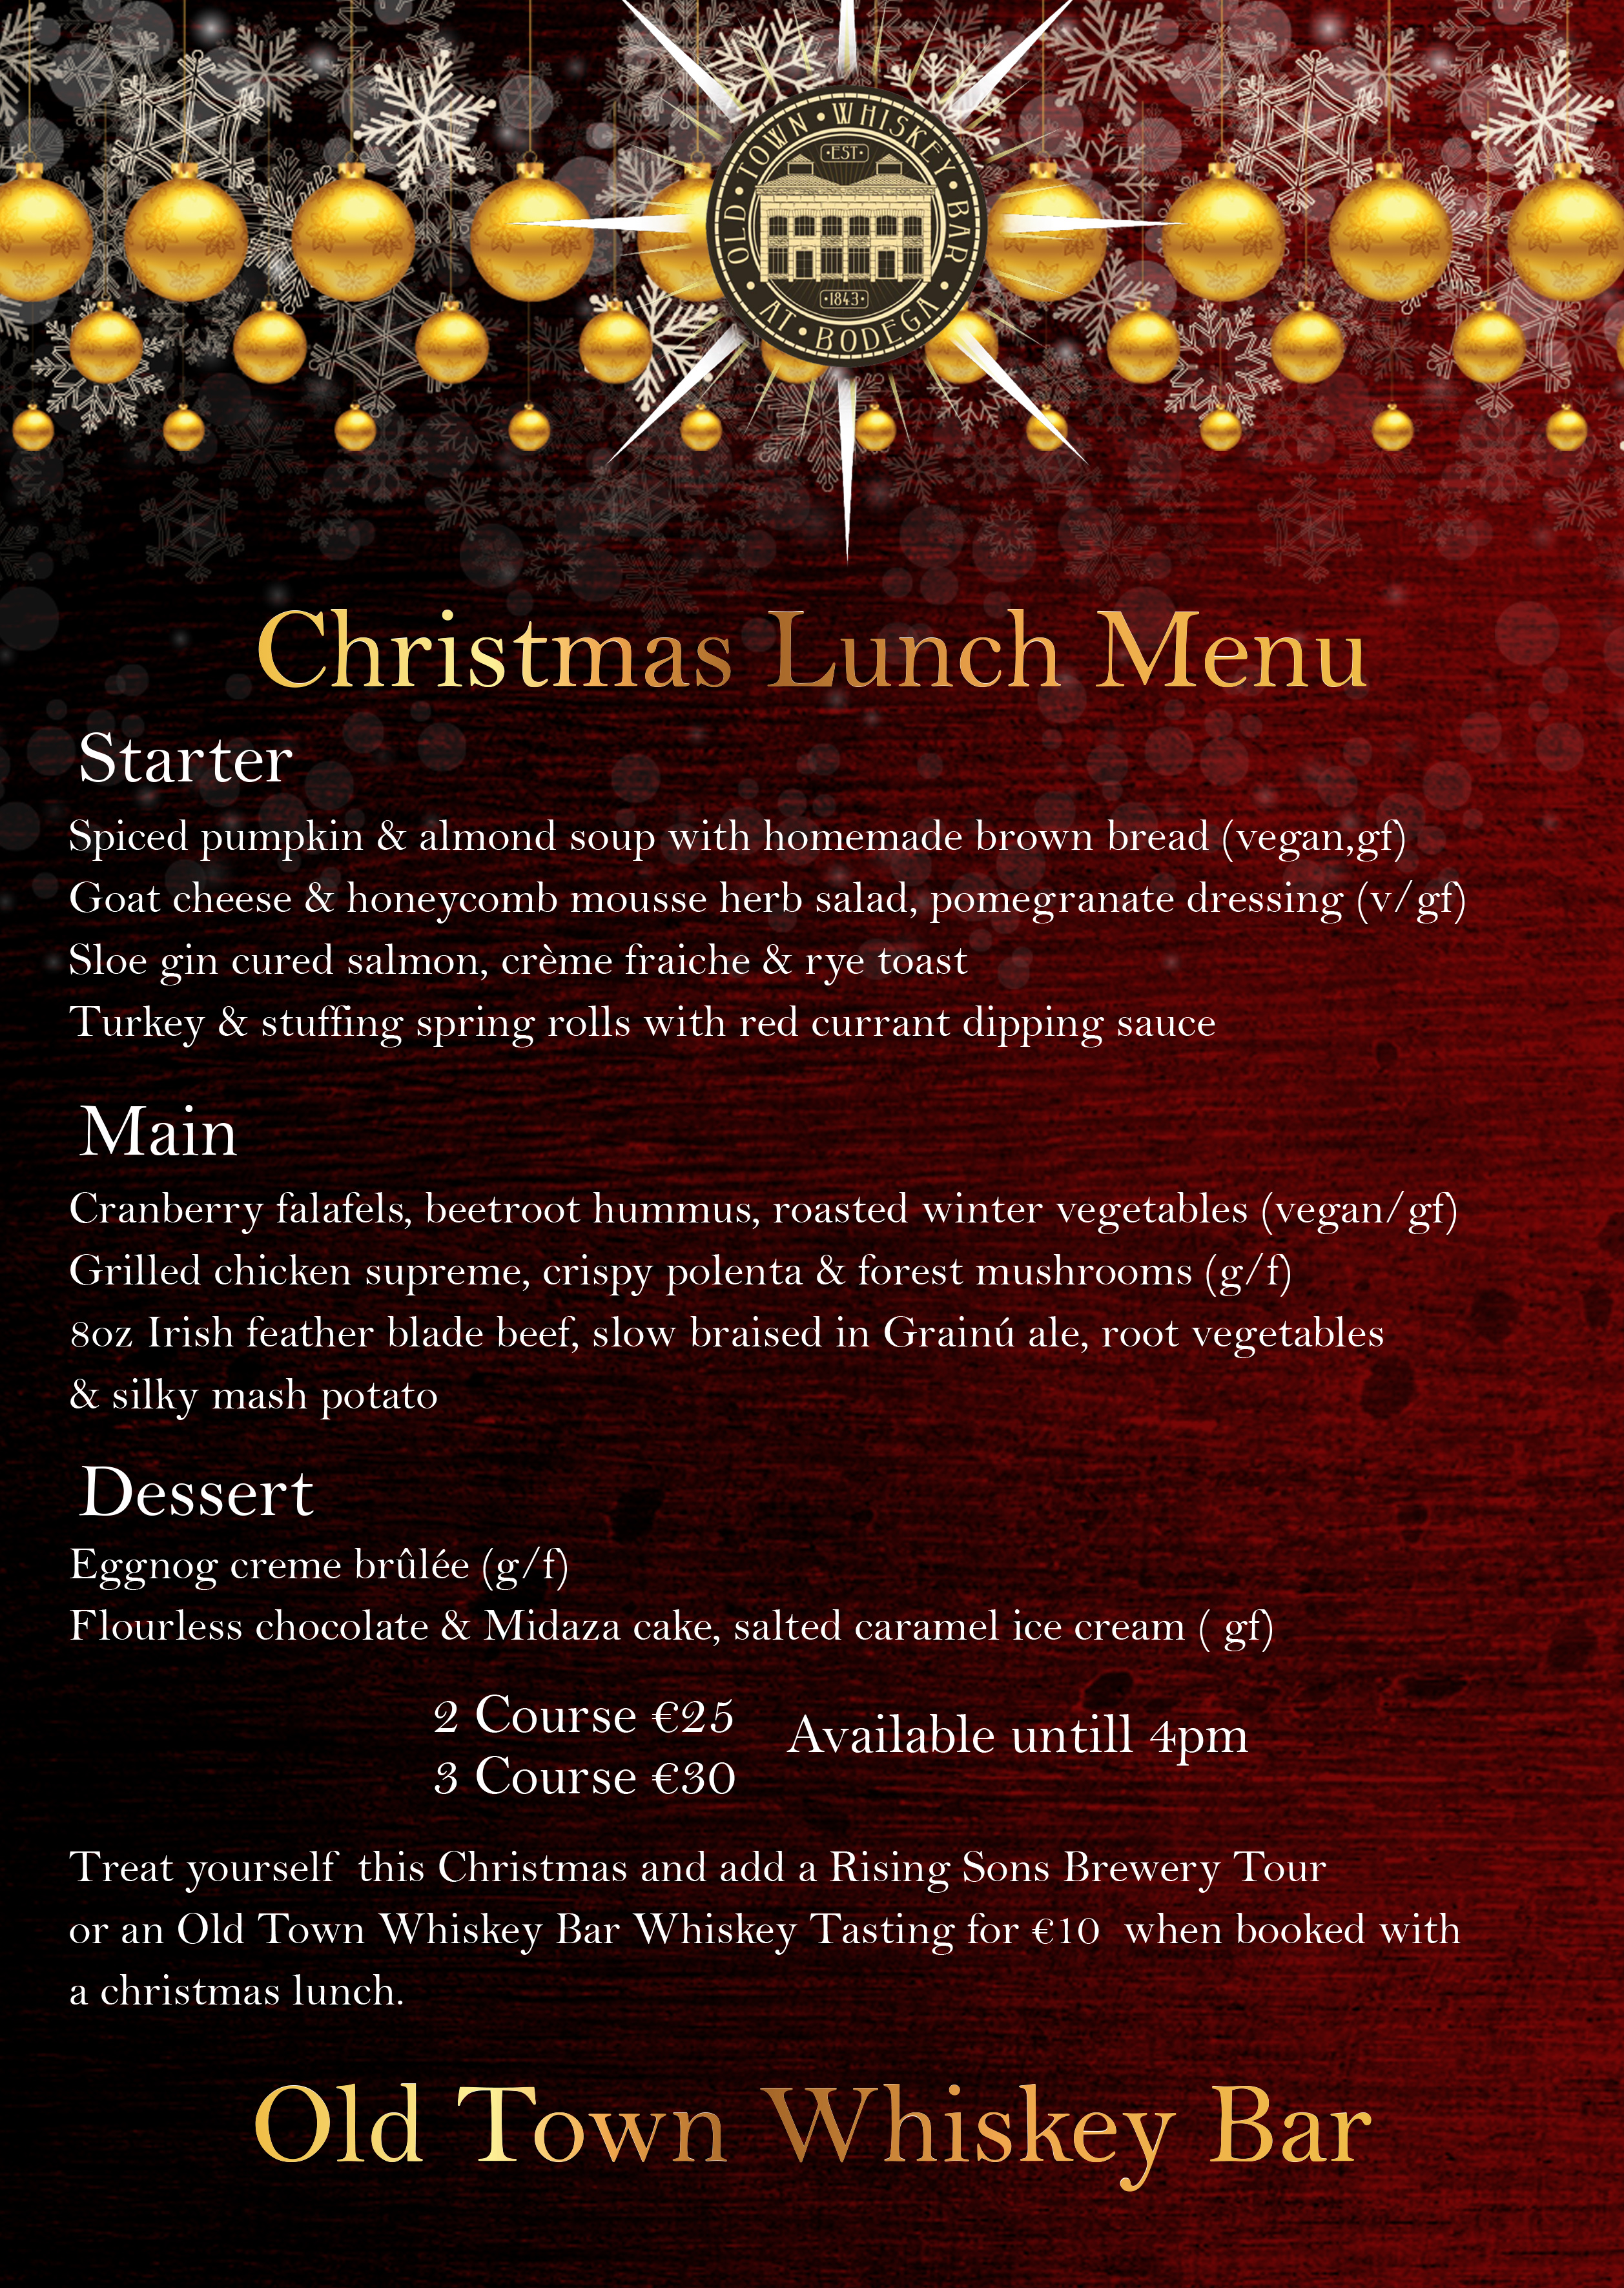 American Christmas Lunch Menu The Cake Boutique